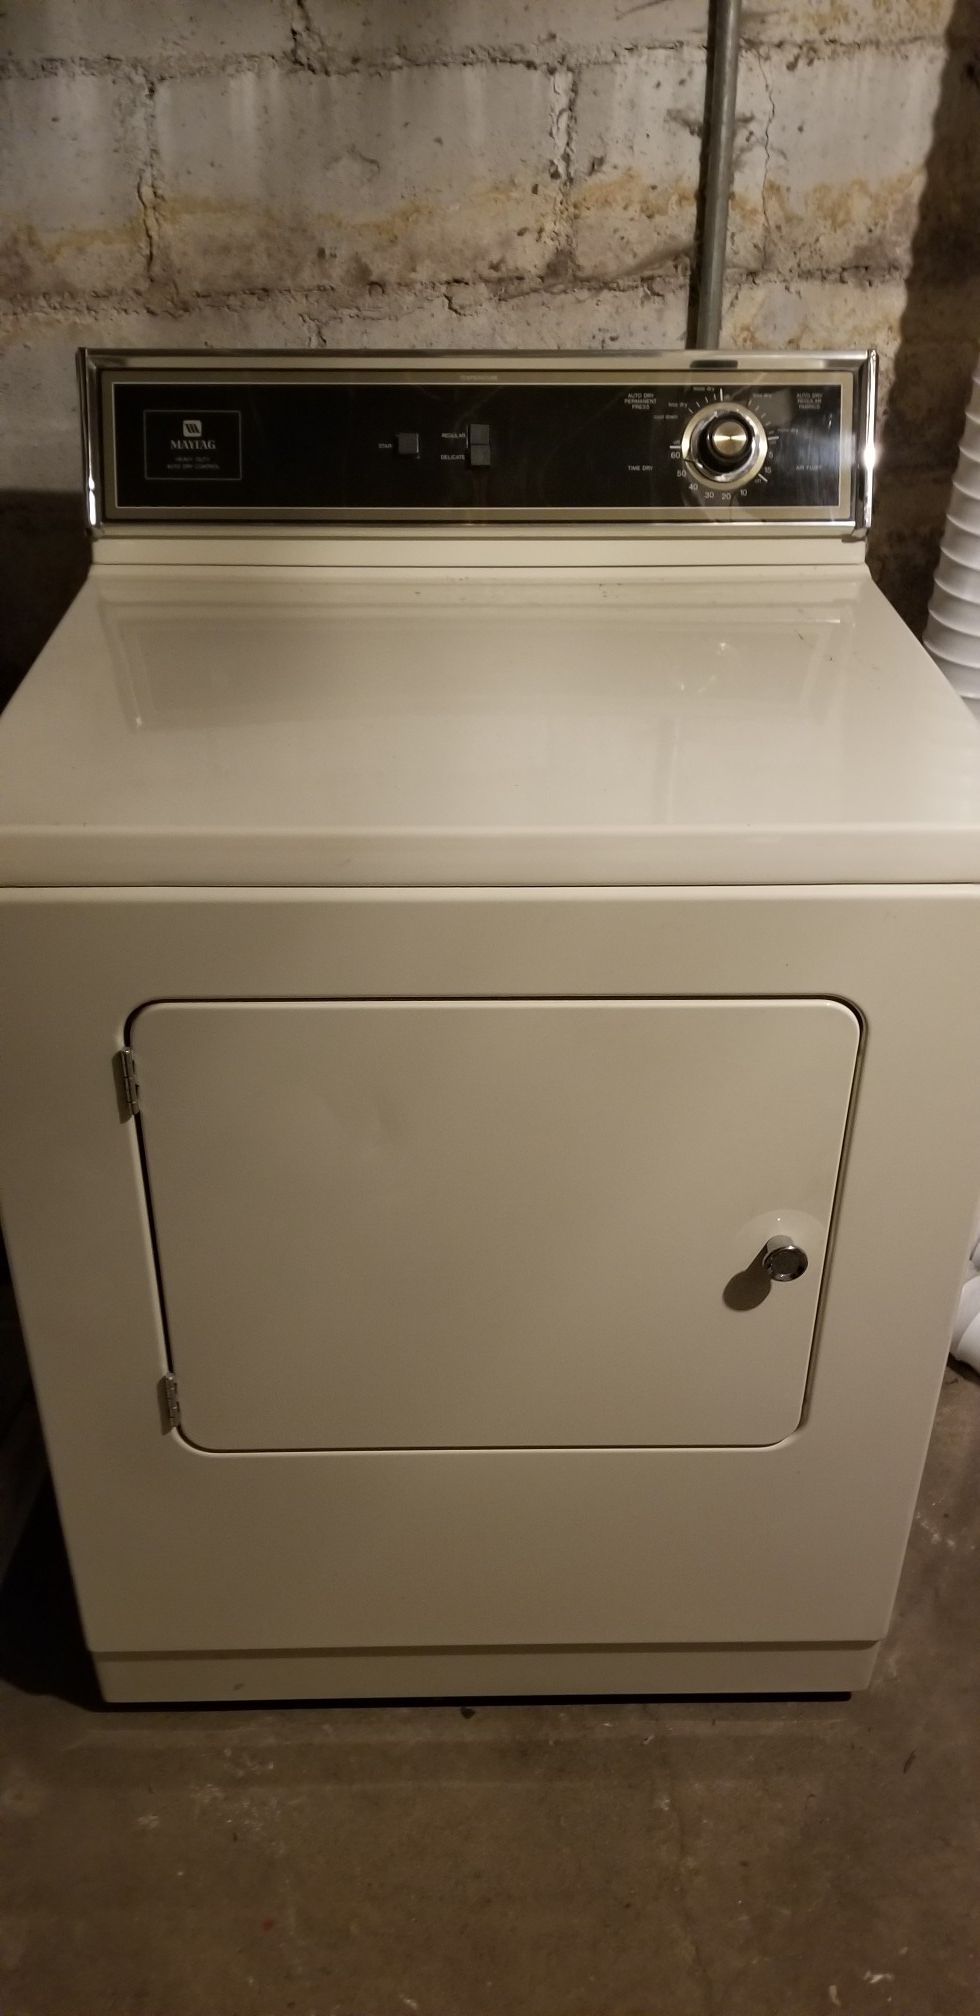 Maytag washer and dryer set